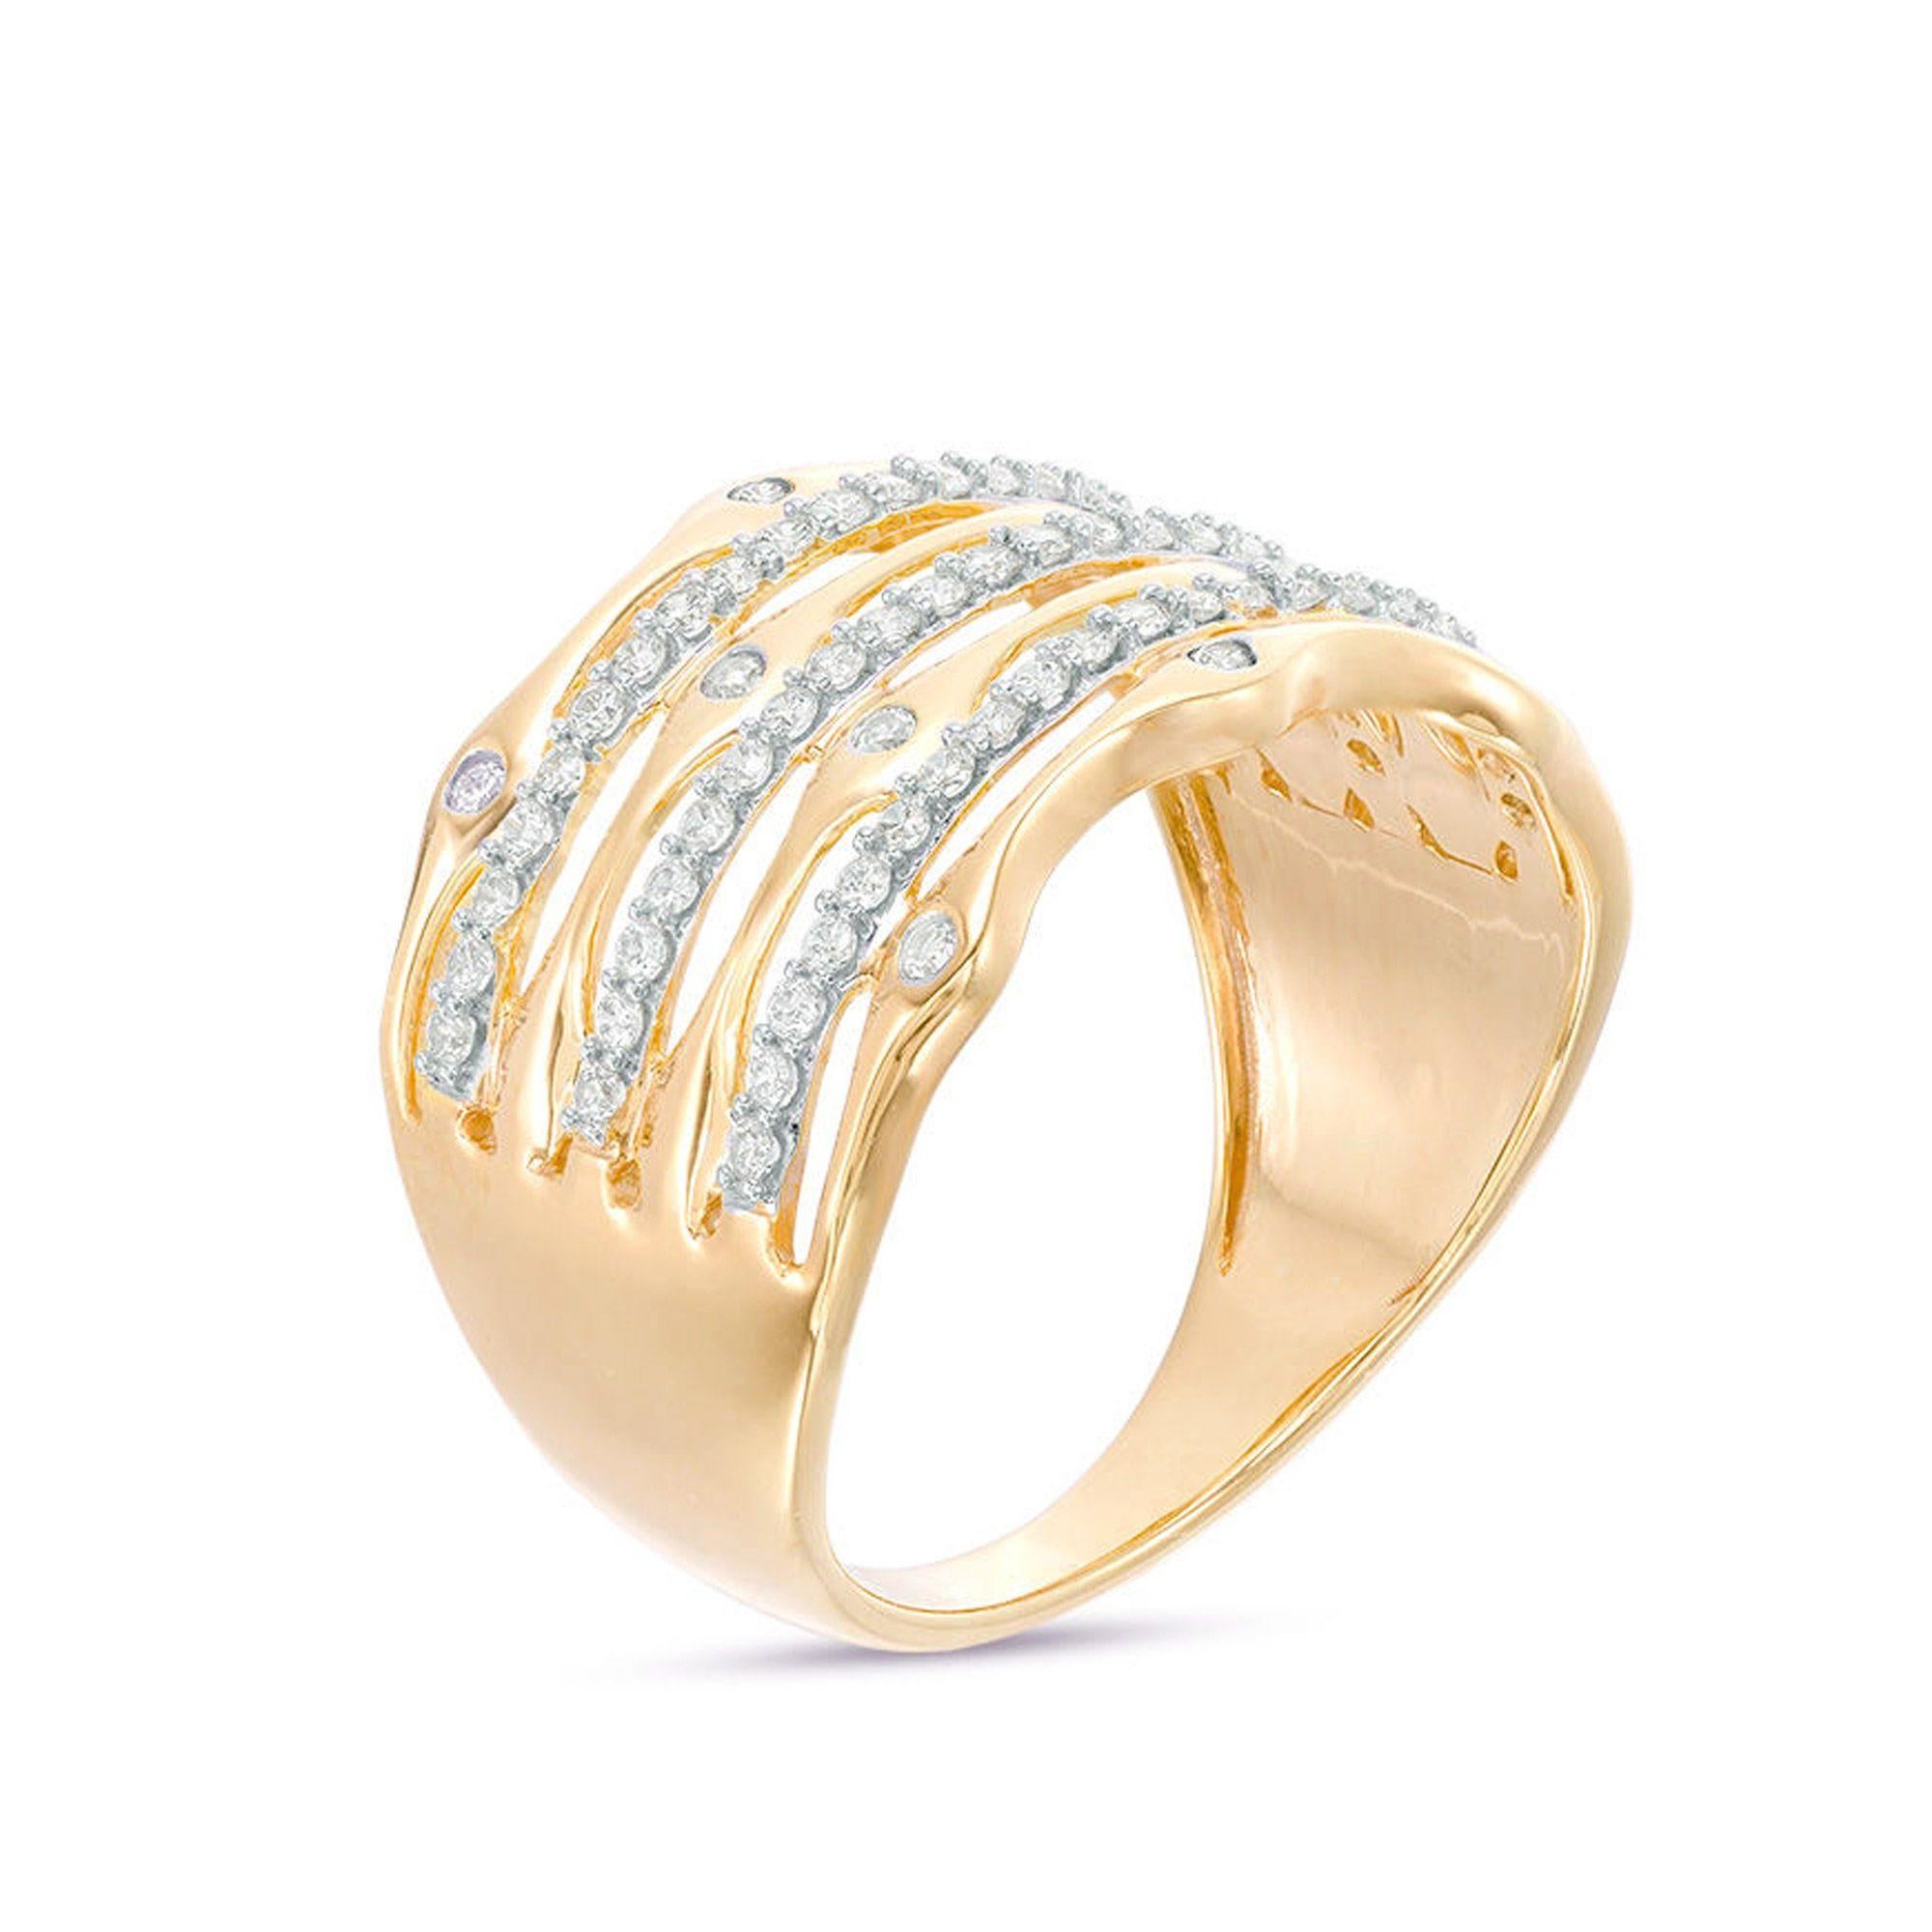 Hand-crafted in 10 kt yellow gold and studded with 73 round diamonds in prong and flush setting. Diamonds are graded H-I Color, I3 Clarity
